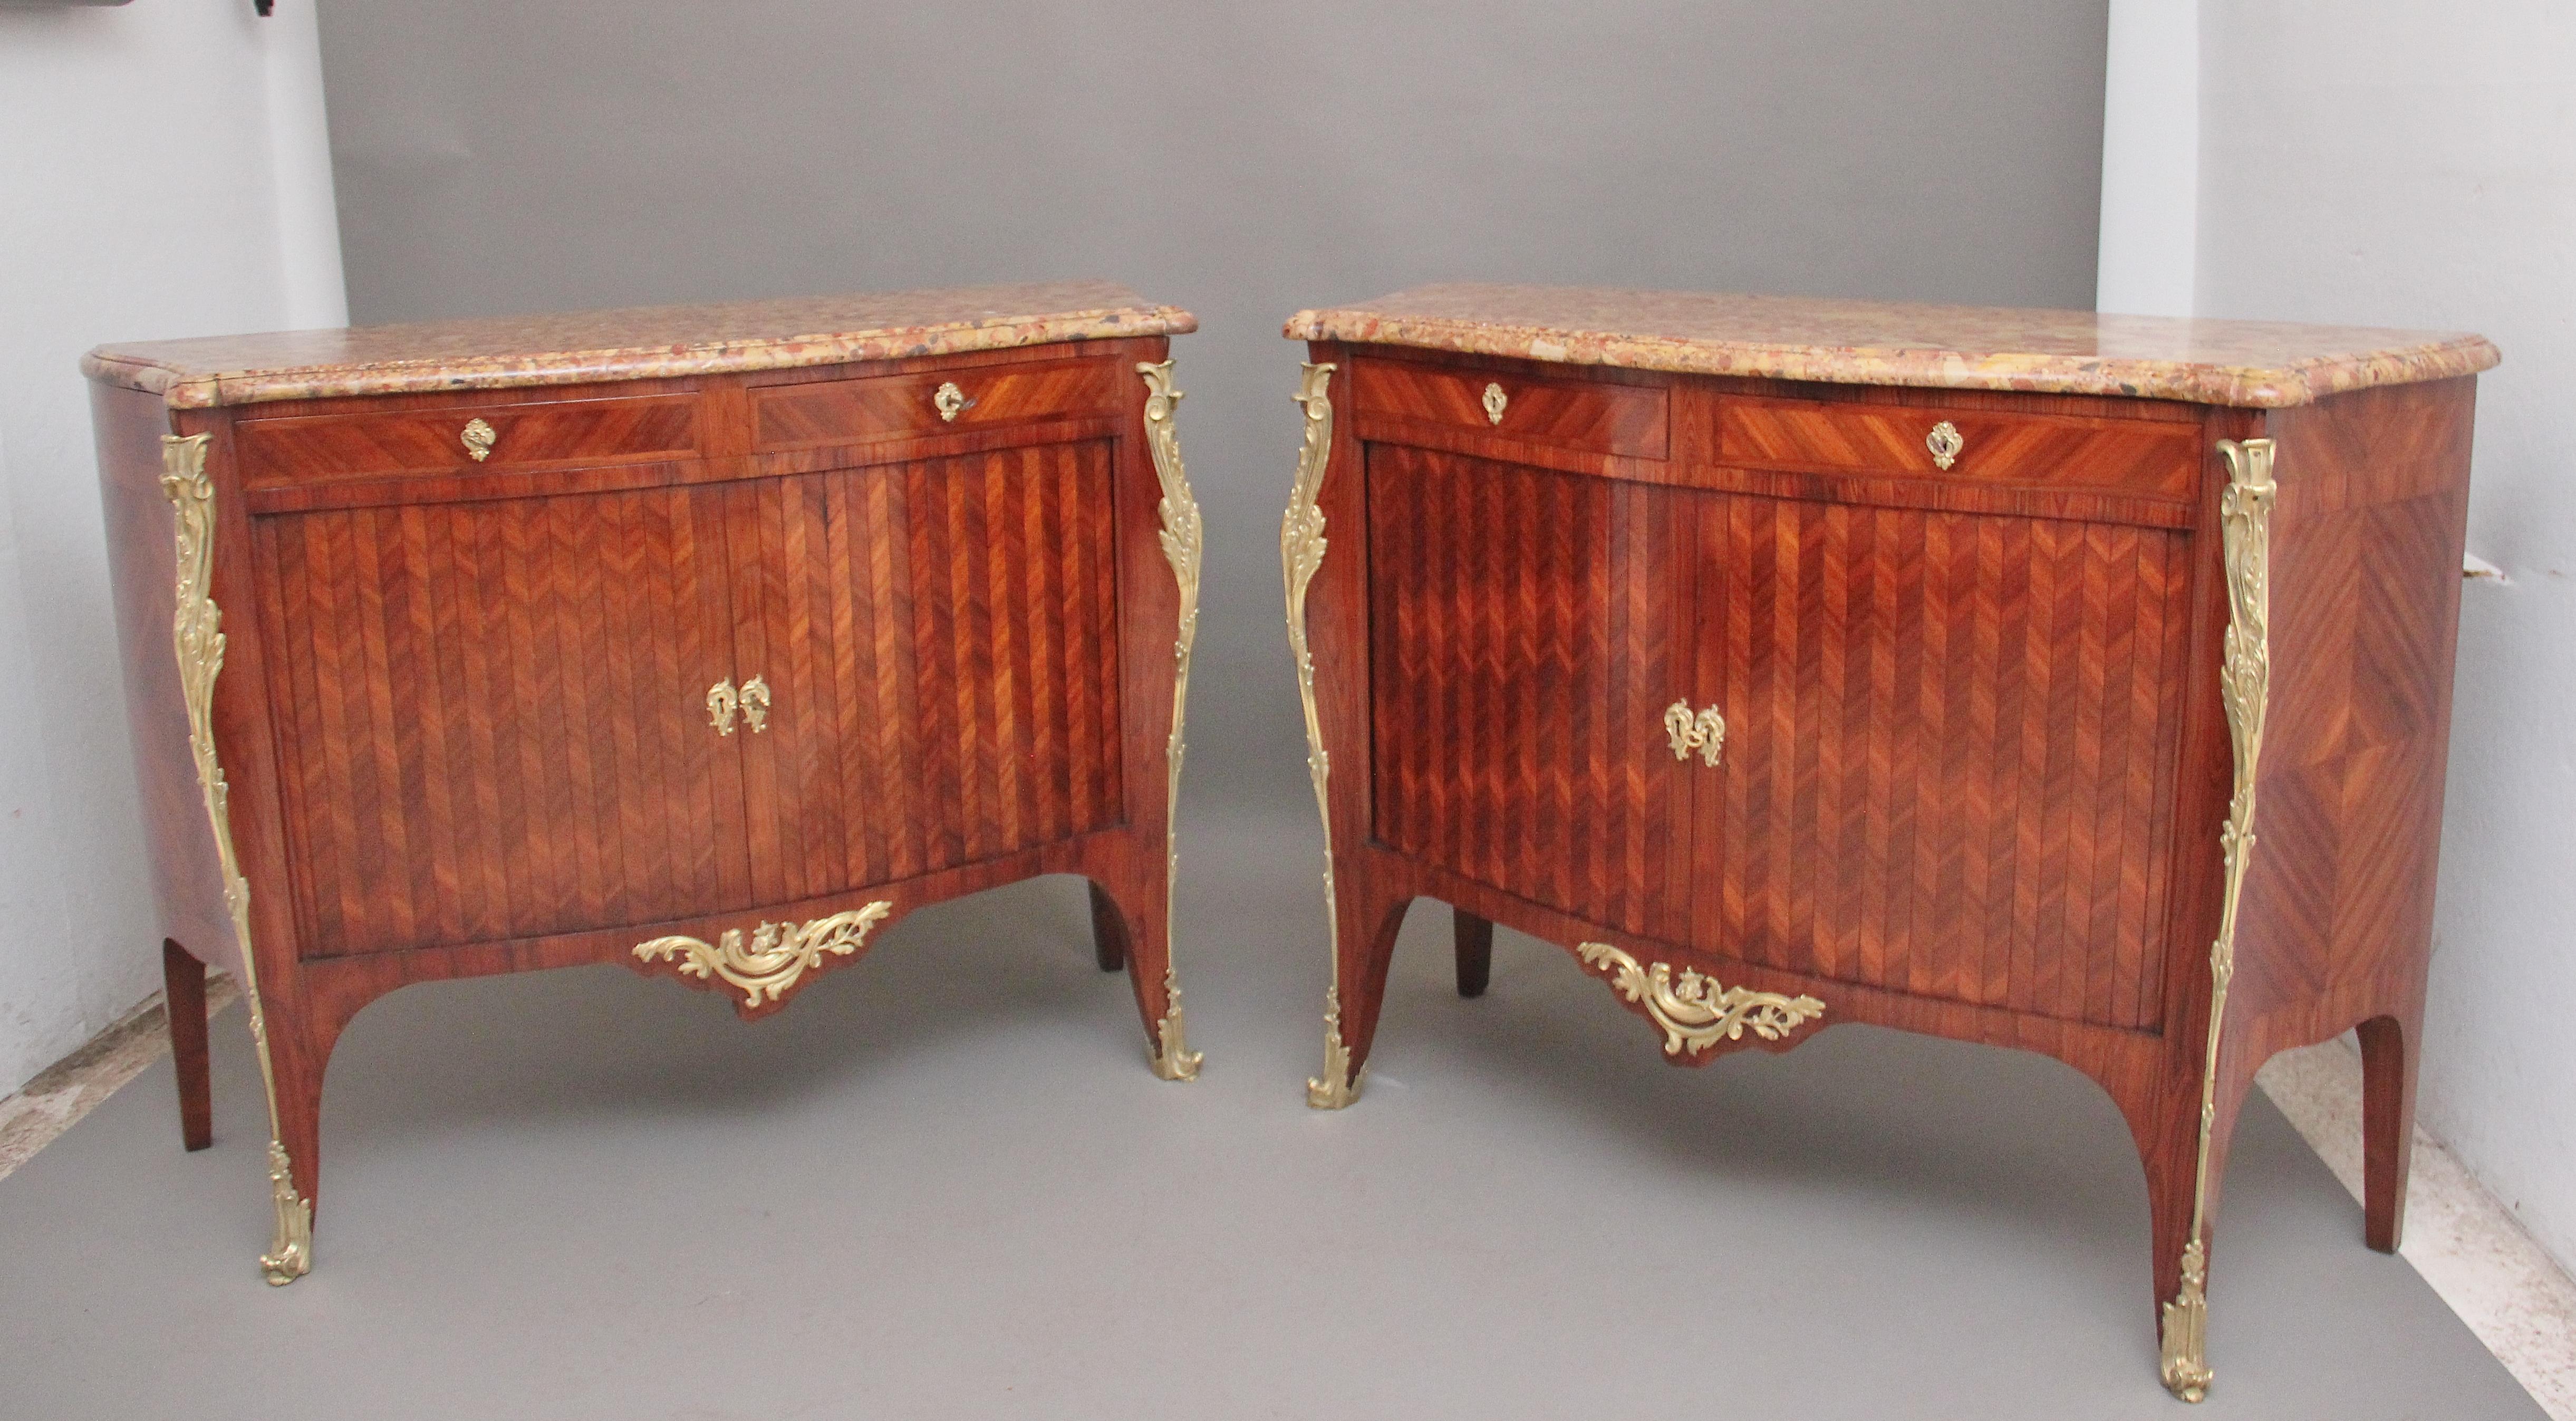 A pair of 19th century French Kingwood and marble top commodes of exceptional quality, having the original highly decorative shaped marble tops with a moulded edge, two oak lined drawers below and a two tambour door opening to reveal a large